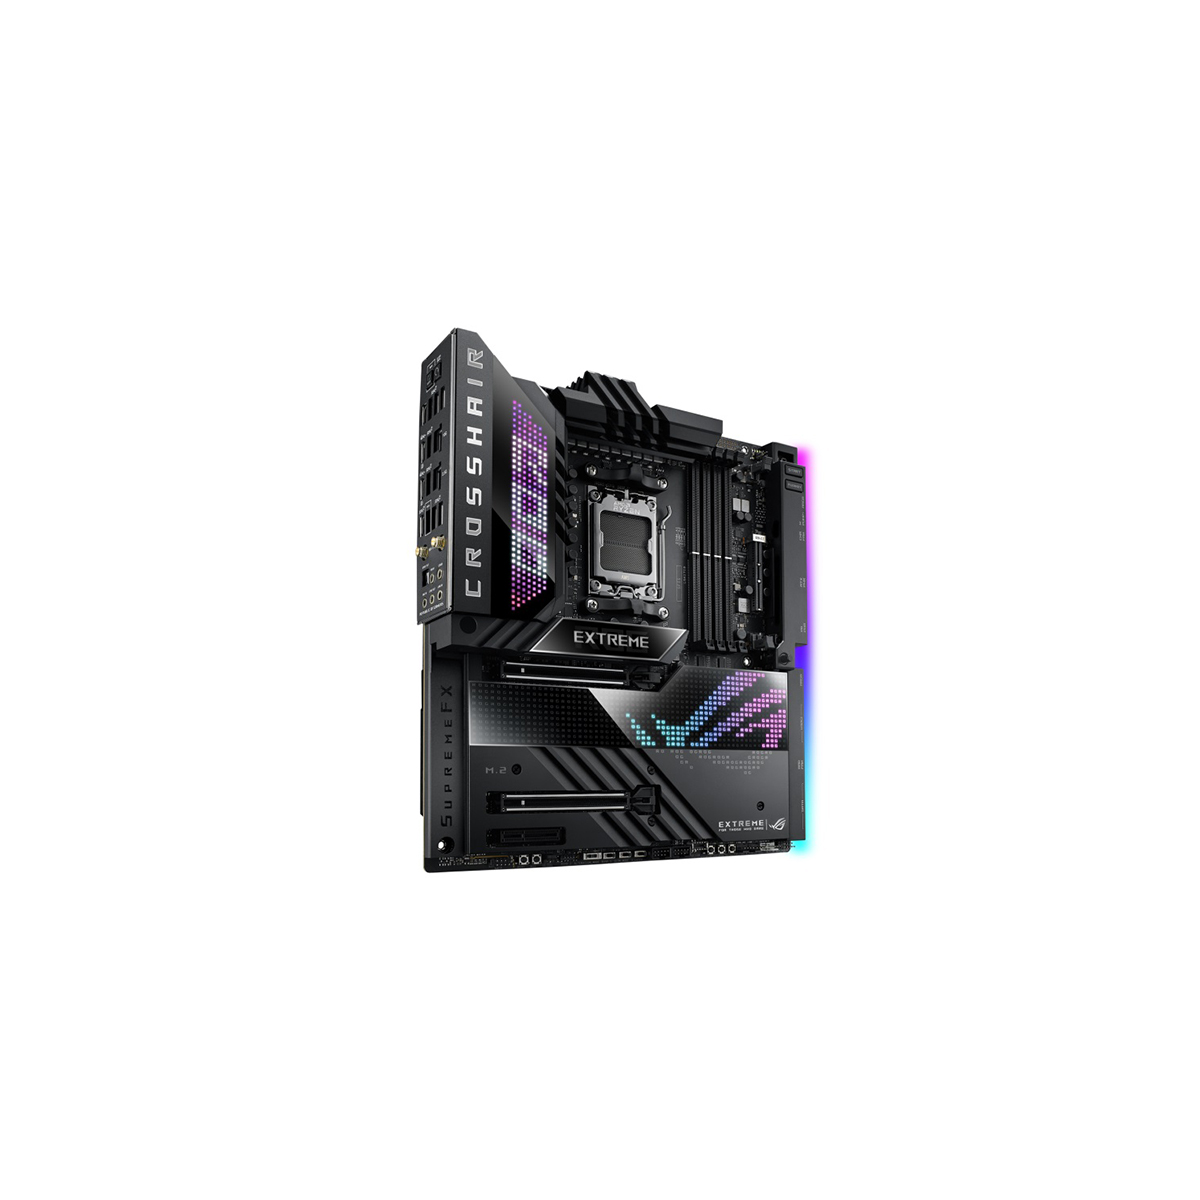 MB ASUS ROG CROSSHAIR X670E EXTREME AMD AM5 DDR5 128GB WIFI 6E ROG CROSSHAIR X670E EXTREME - ASUS